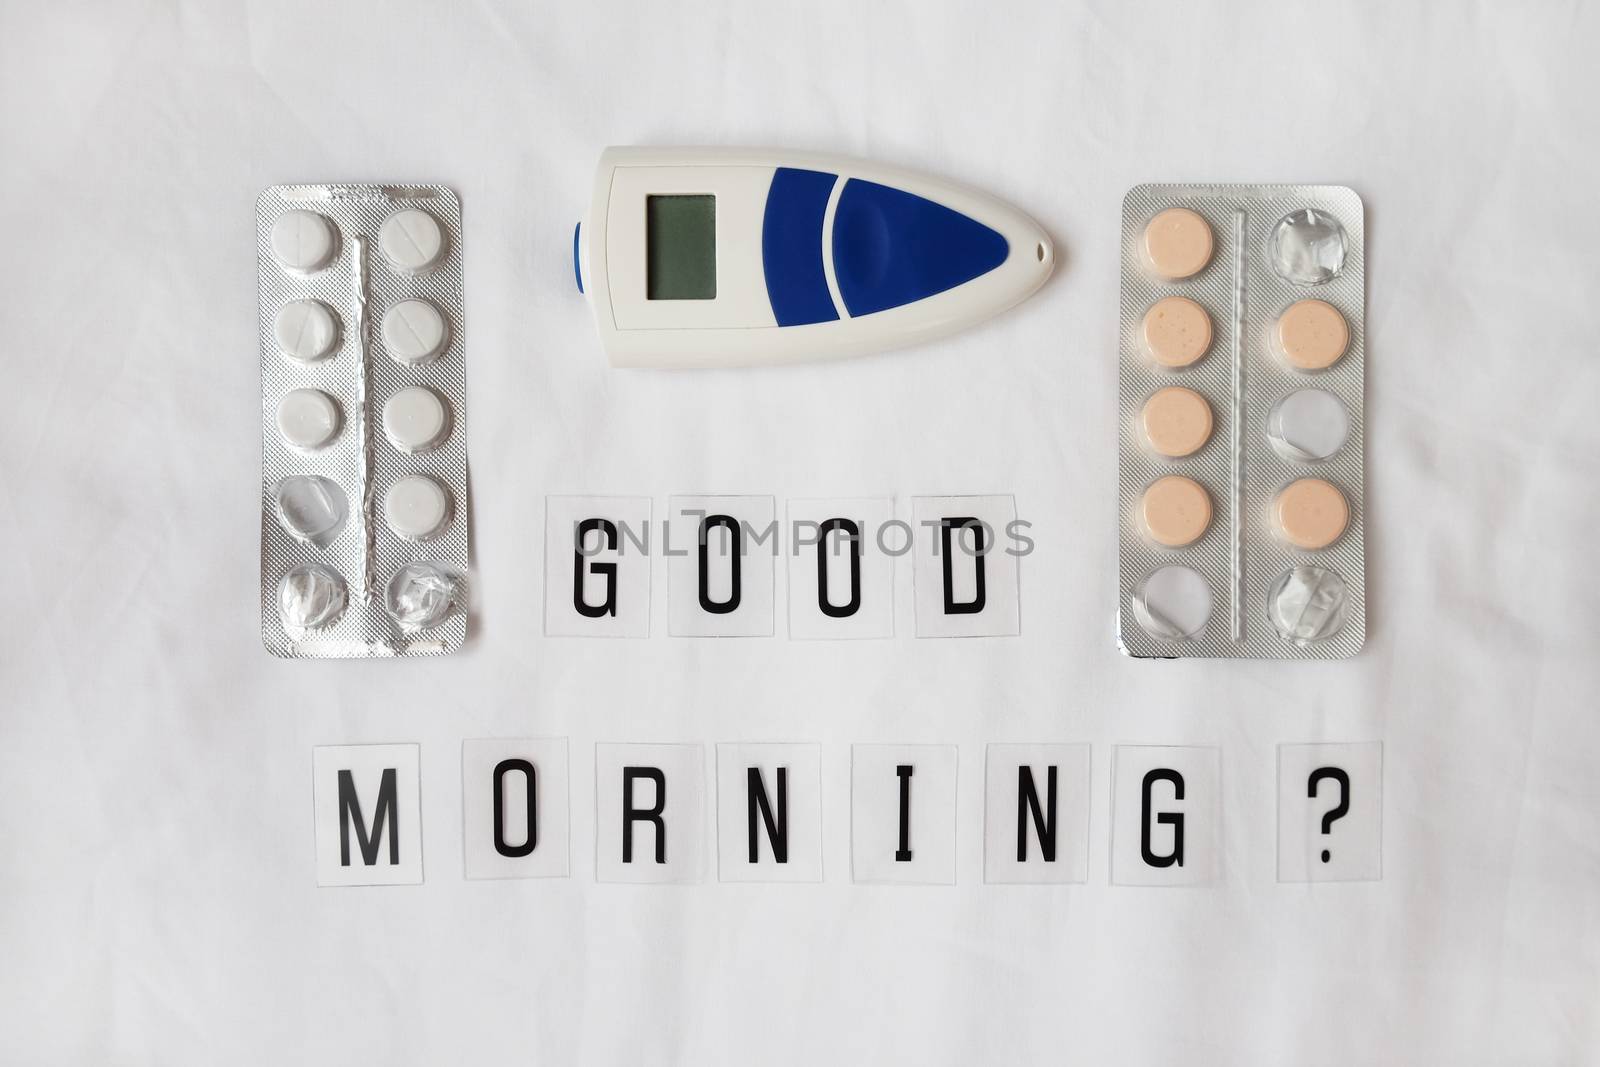 Inscription question Good morning, pills, thermometer on crumpled white sheet. Awakening concept with headache, fever, medicine, illness, health, hangover, migraine. Horizontal, flat lay.